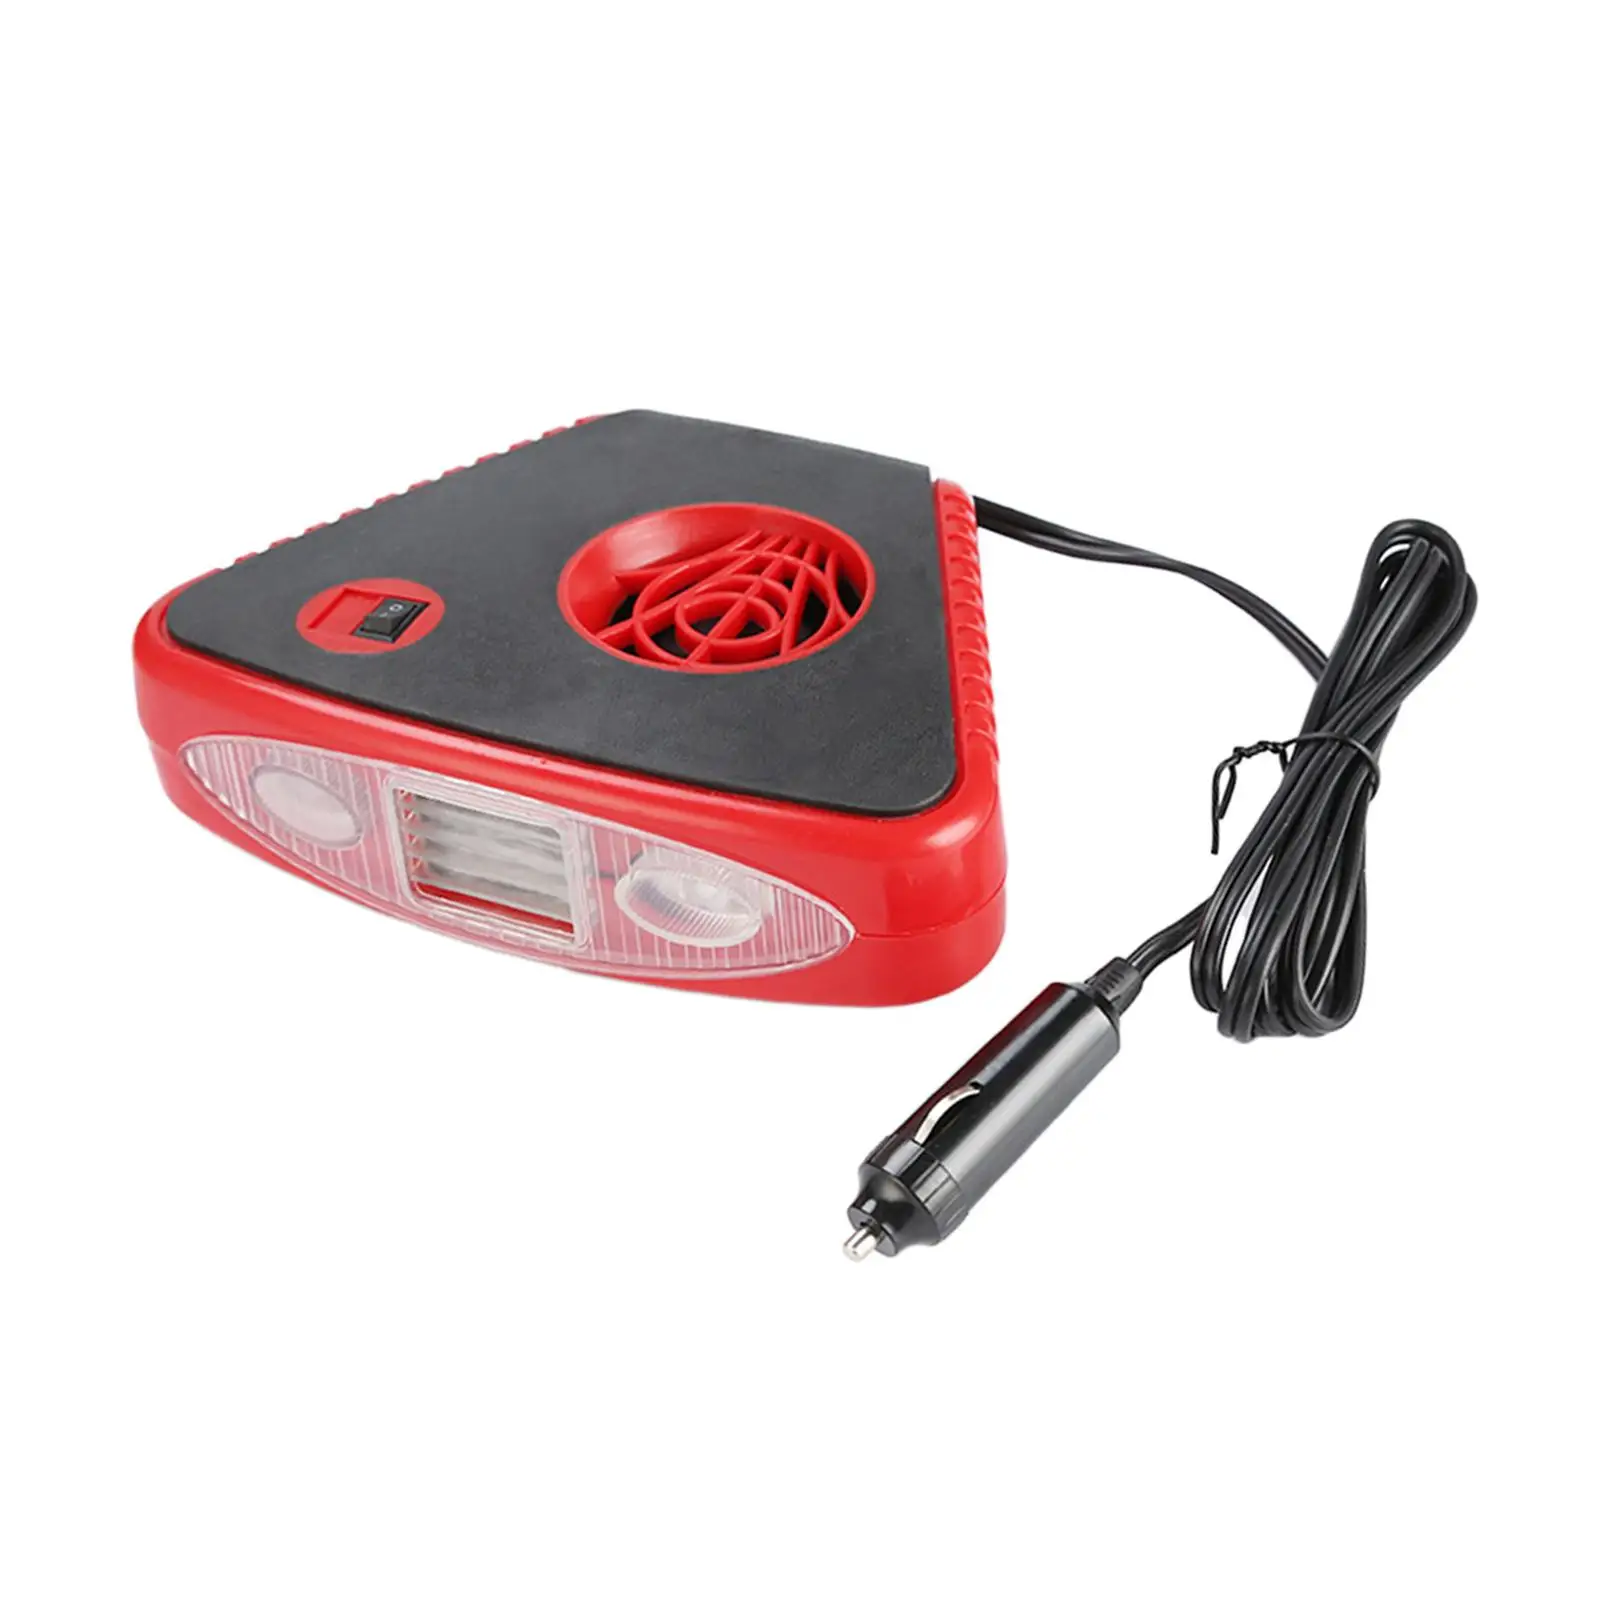 Portable 12V 150W Car Heater Fan with Light for Vehicles in Winter